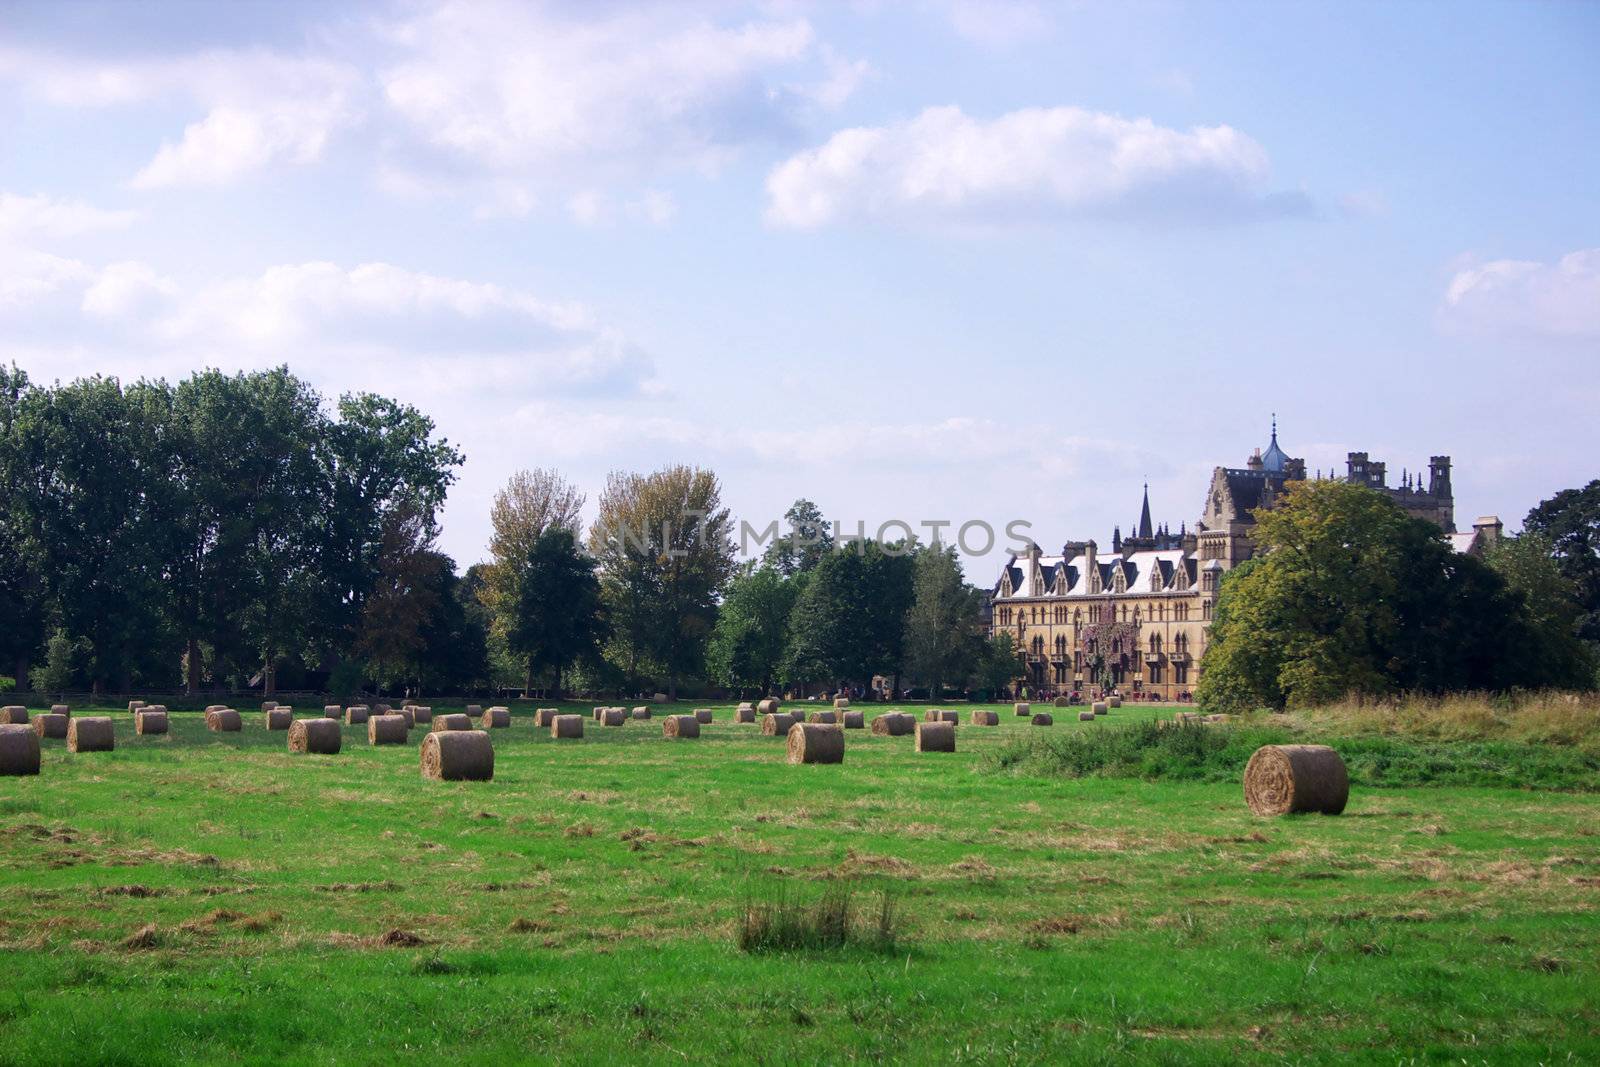  Christ Church Meadow, Oxford, UK is the land that belongs to the church-college. Christ Church is one of the colleges of Oxford Univeristy and at the same time the Cathedral church of the diocese of Oxford.